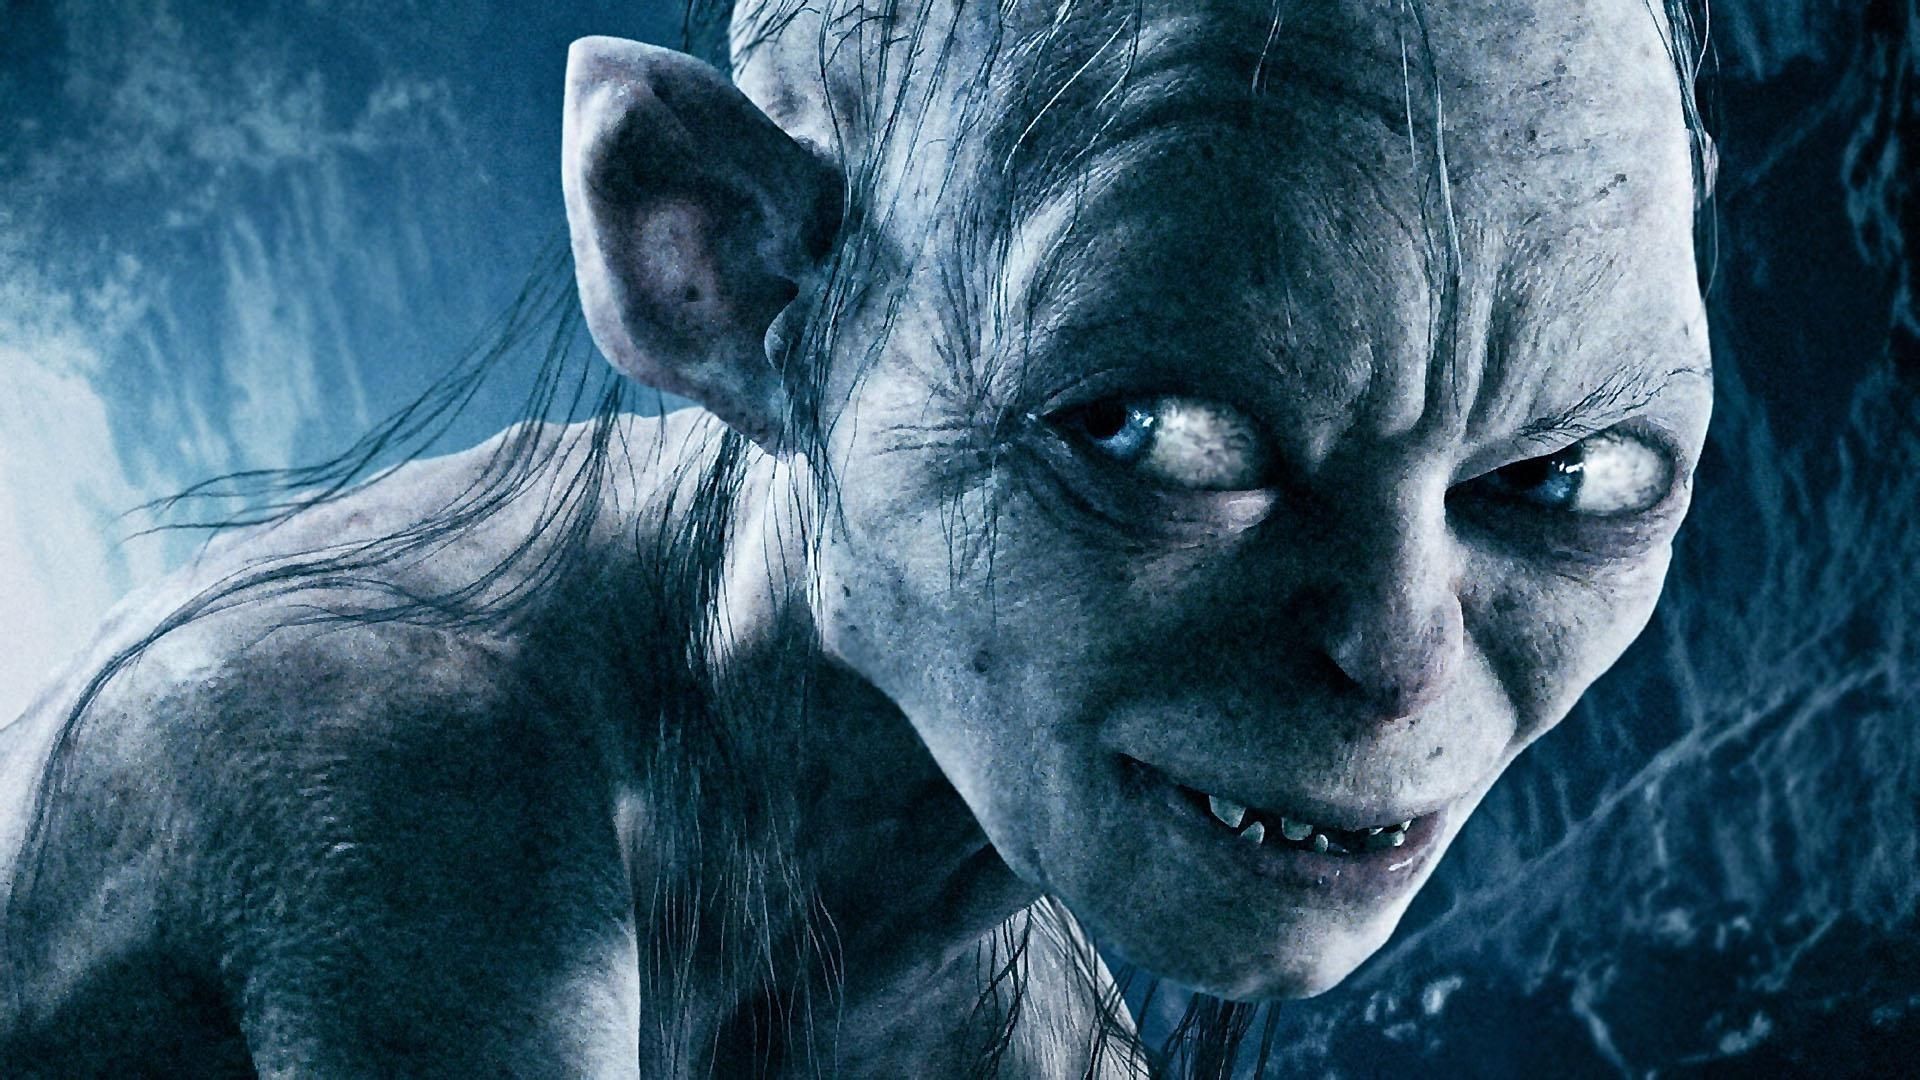 1920x1080 Lord Of The Rings Gollum Wallpaper Desktop #06N | Awesomeness .